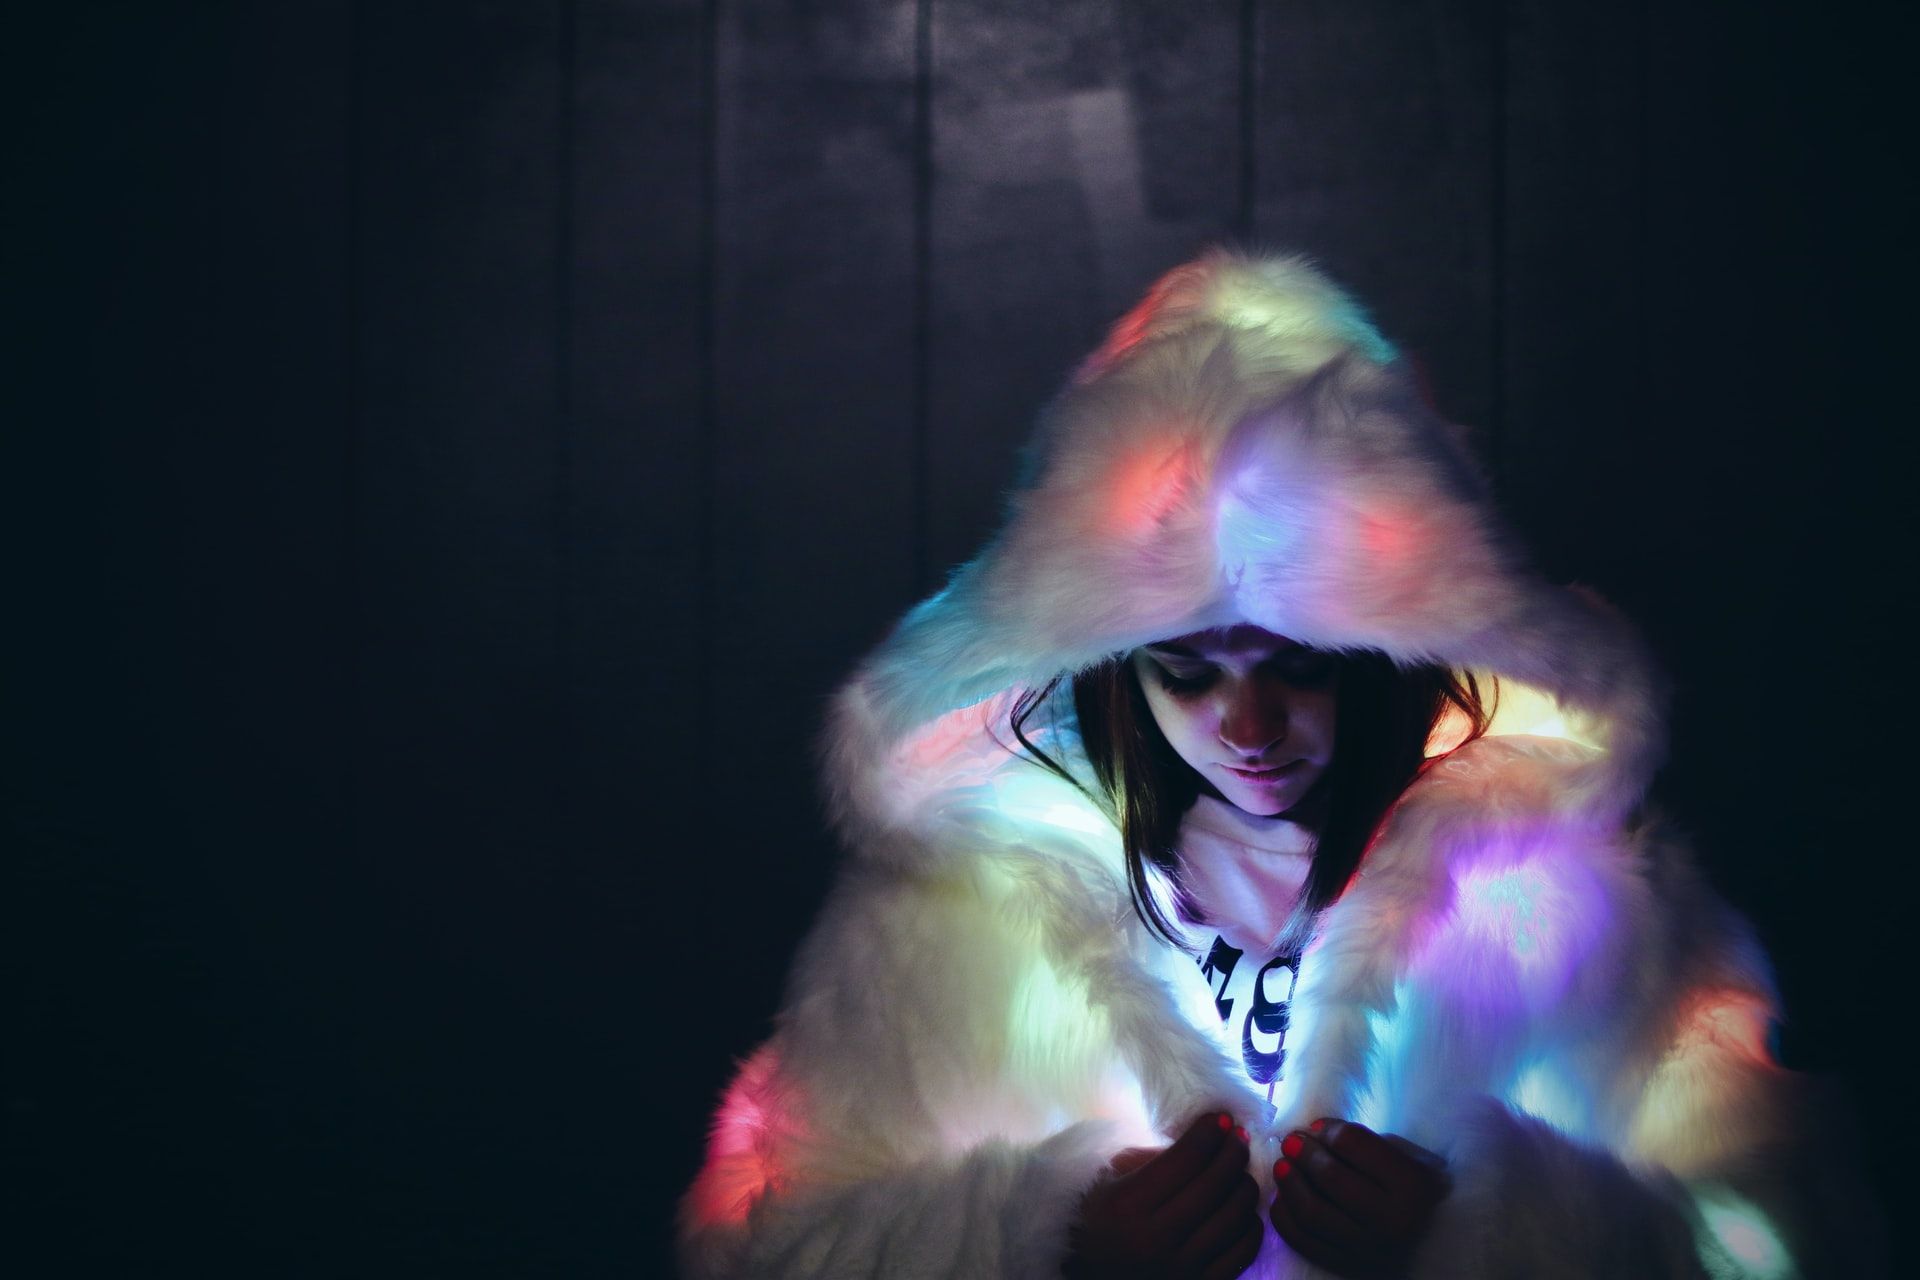 Woman out at night with a light-up jacket